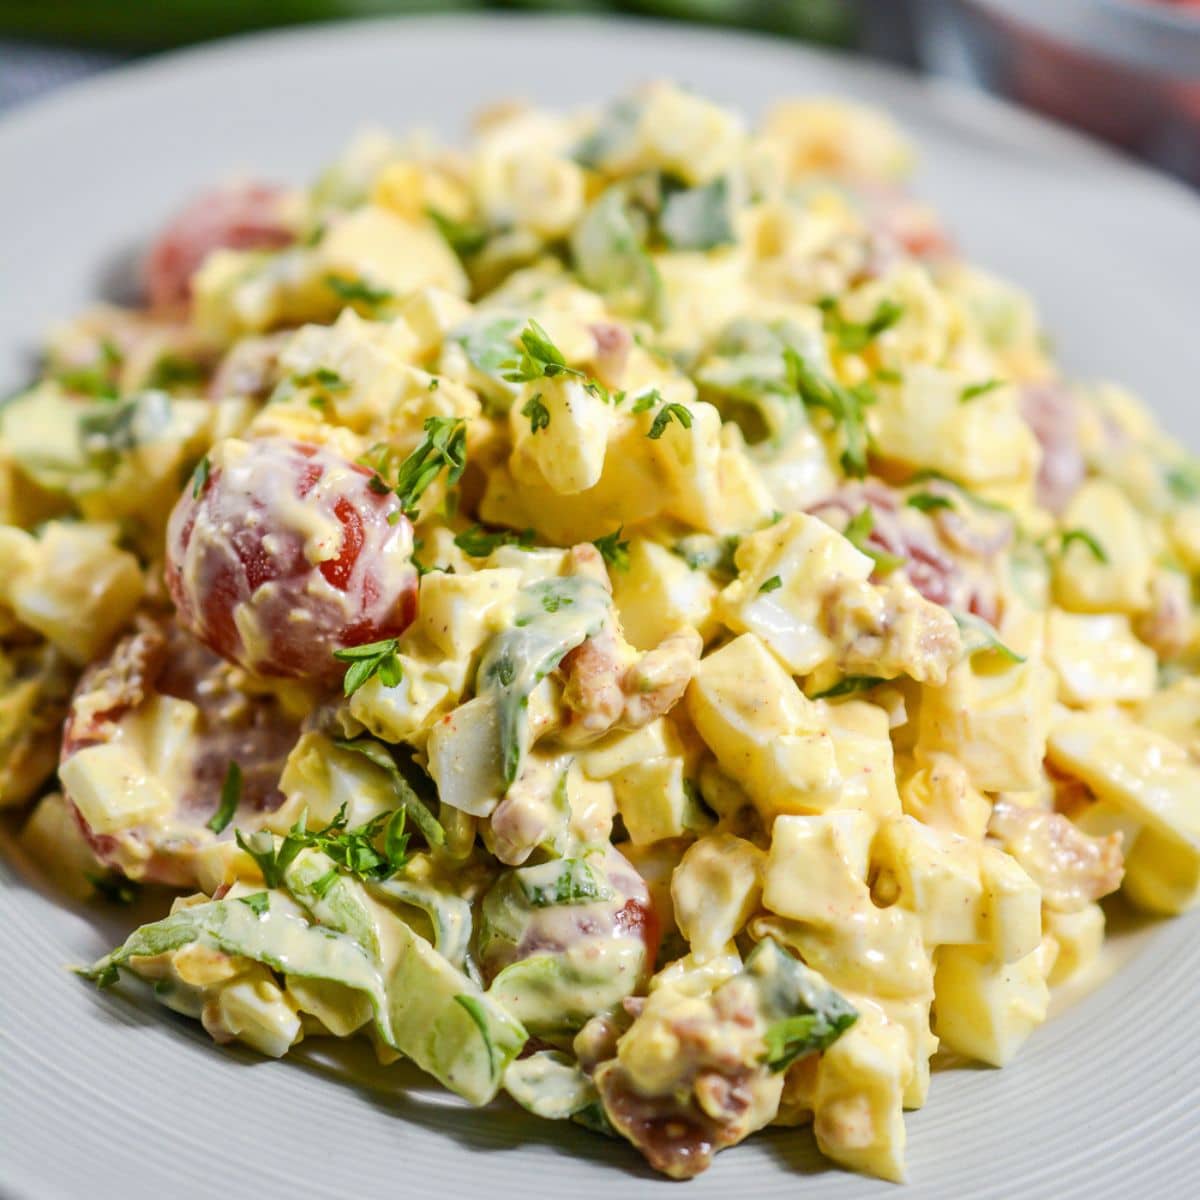 Overhead view of creamy keto egg salad topped with crispy bacon pieces, chopped egg, tomato and chives ready to enjoy as a high protein low carb meal